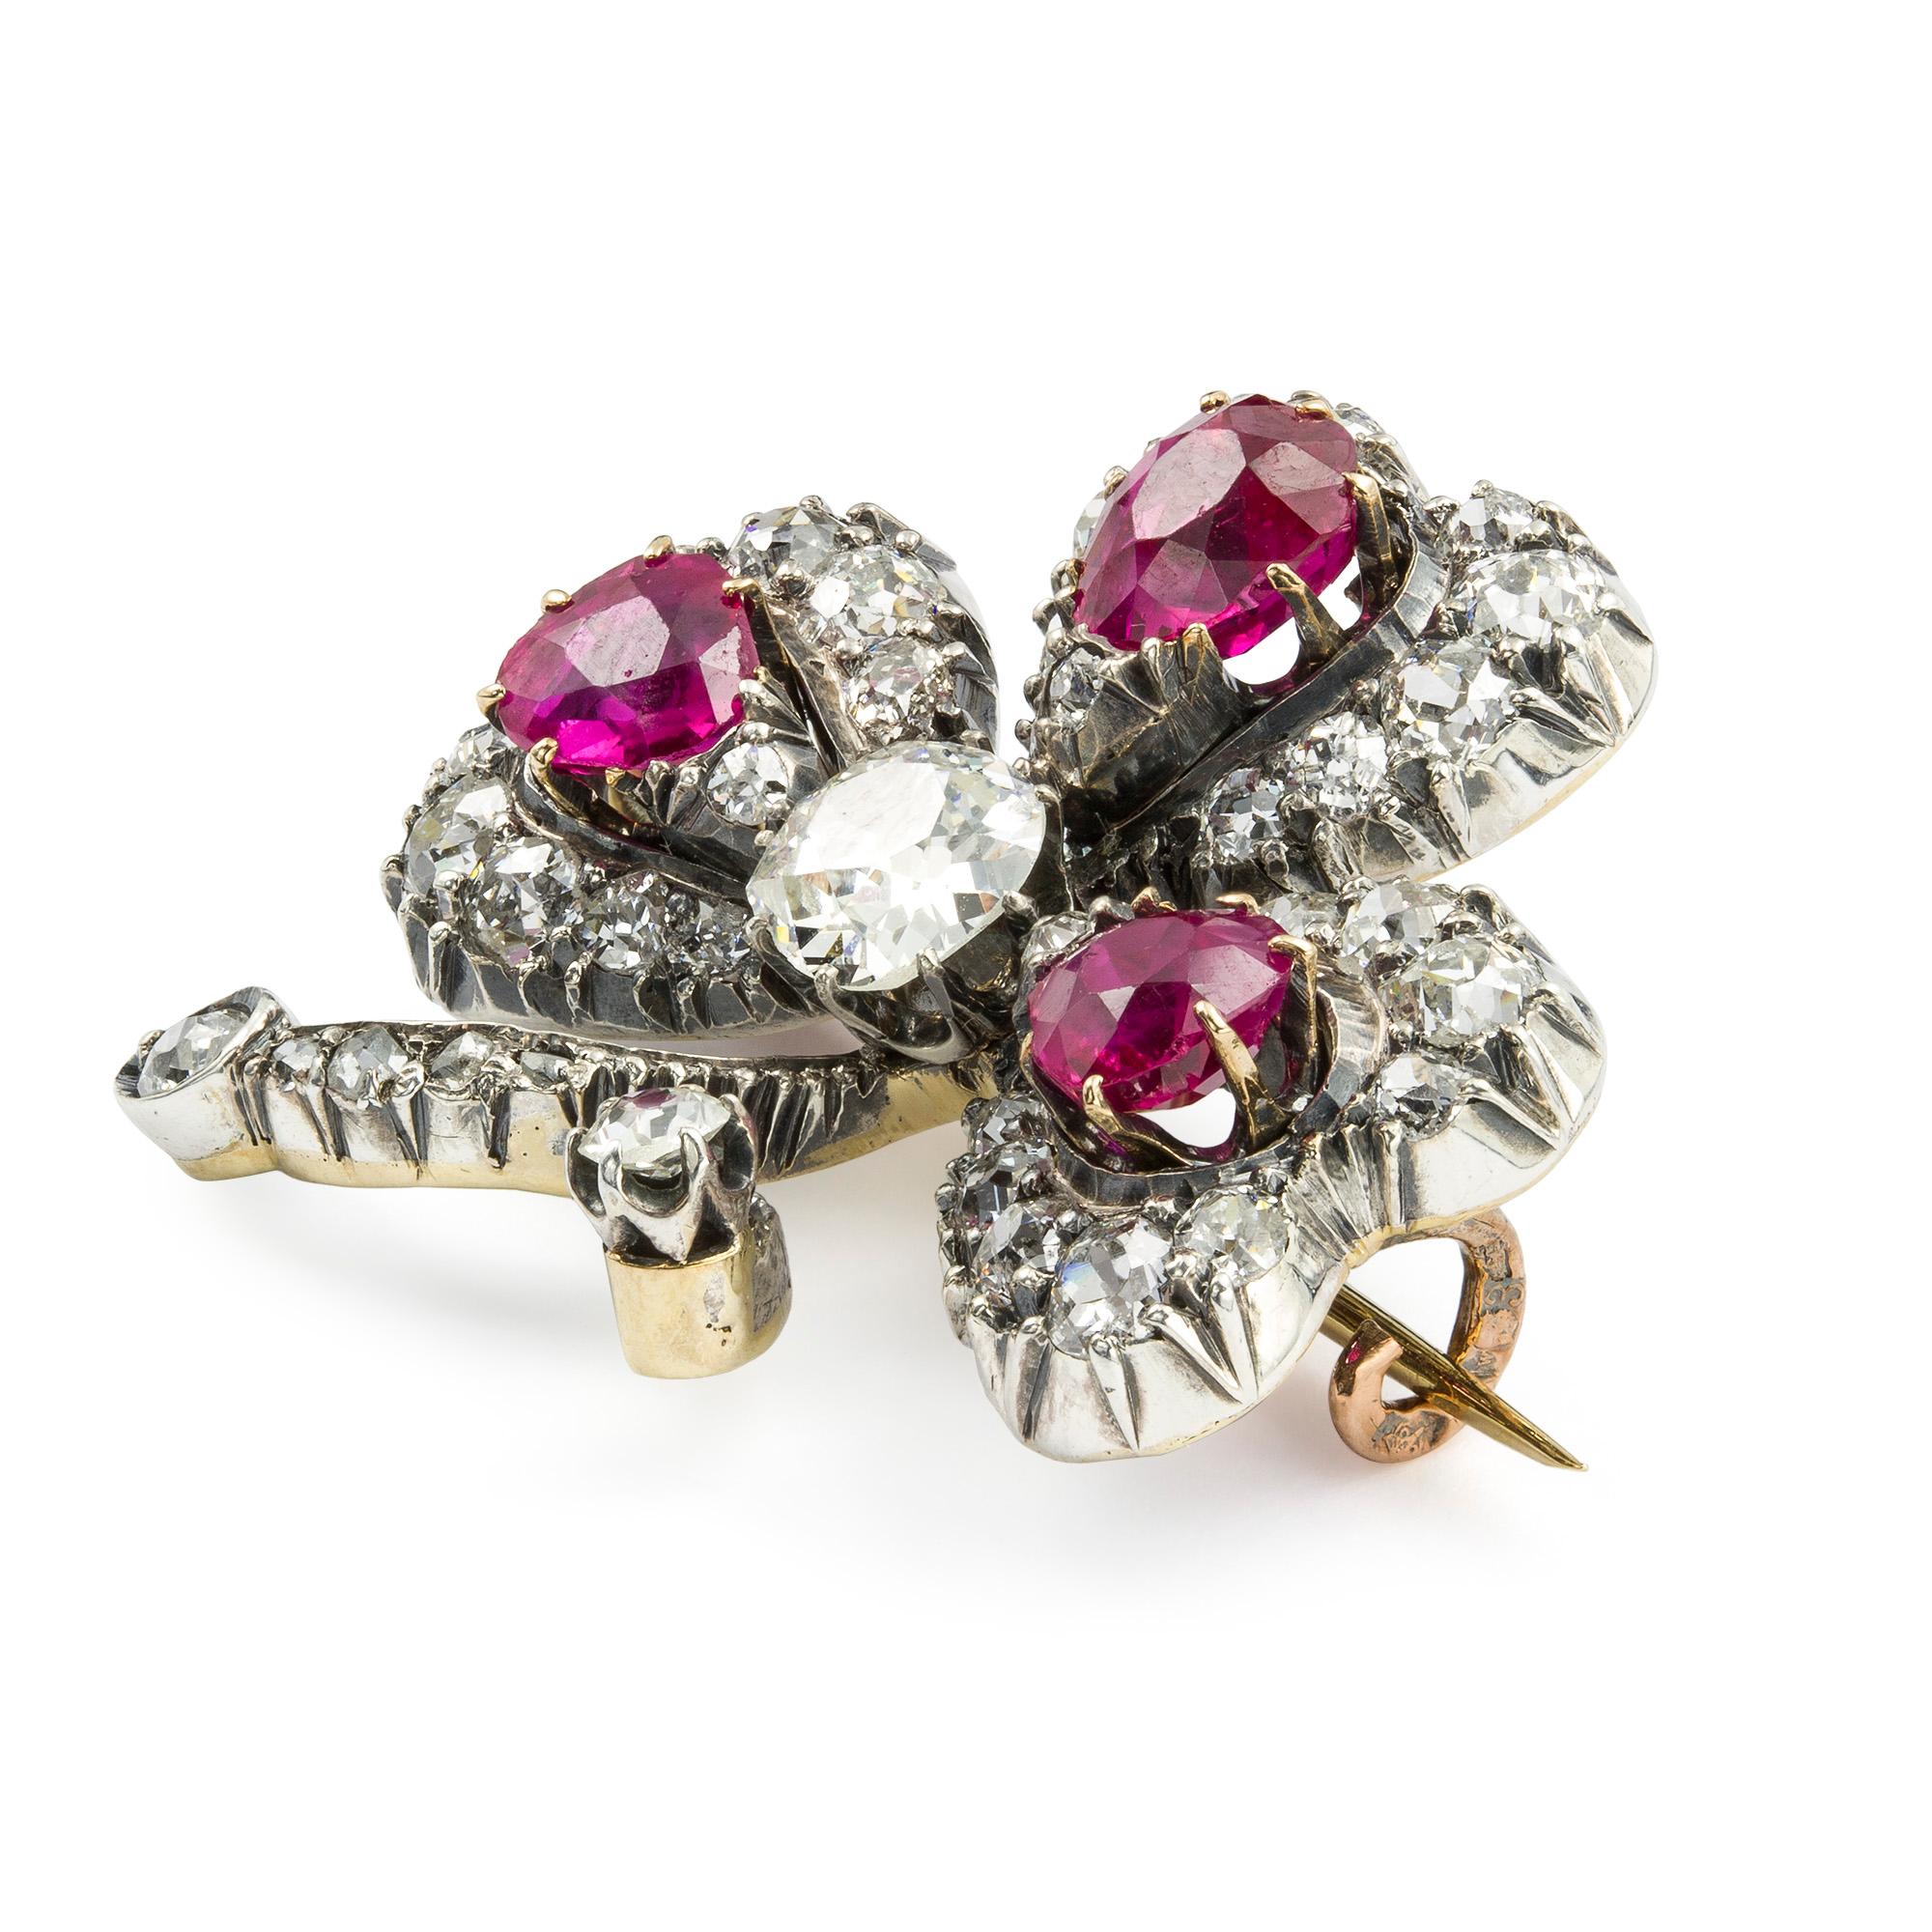 An early 20th century ruby and diamond three leaf clover brooch, the three faceted pear shaped rubies, estimated to weigh a total of 2.5 carats, with a cushion shape old brilliant-cut diamond centre, estimated to weigh 0.6 carats, each to a cluster